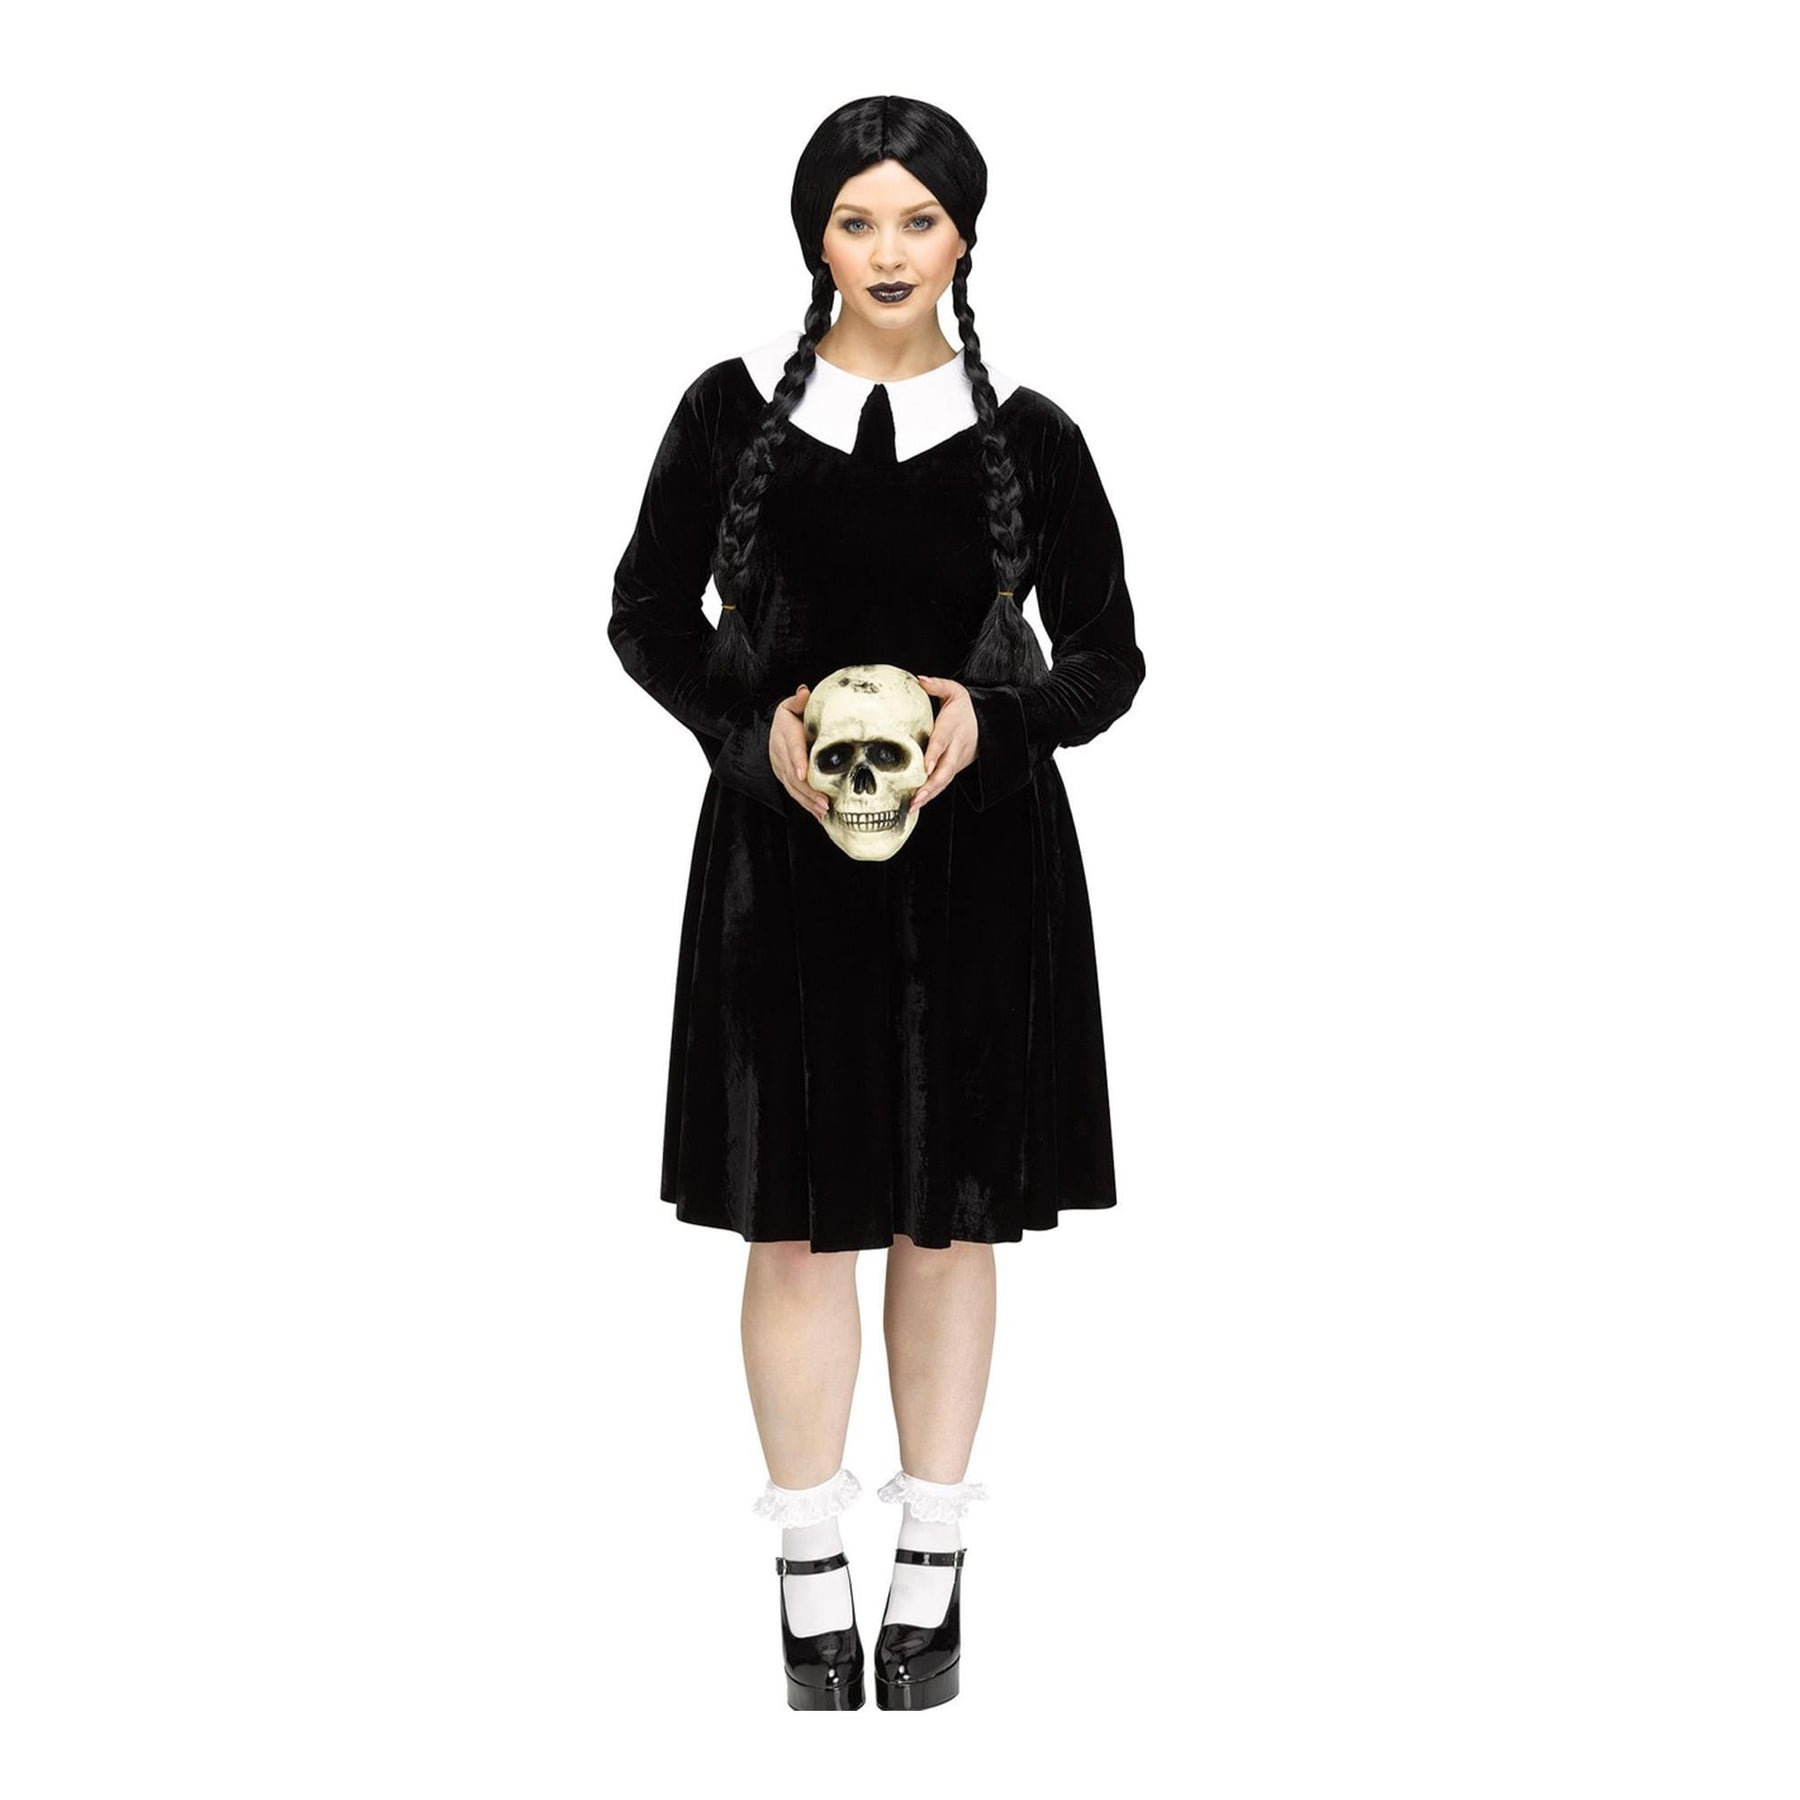 Gothic Girl Adult Plus Size Costume